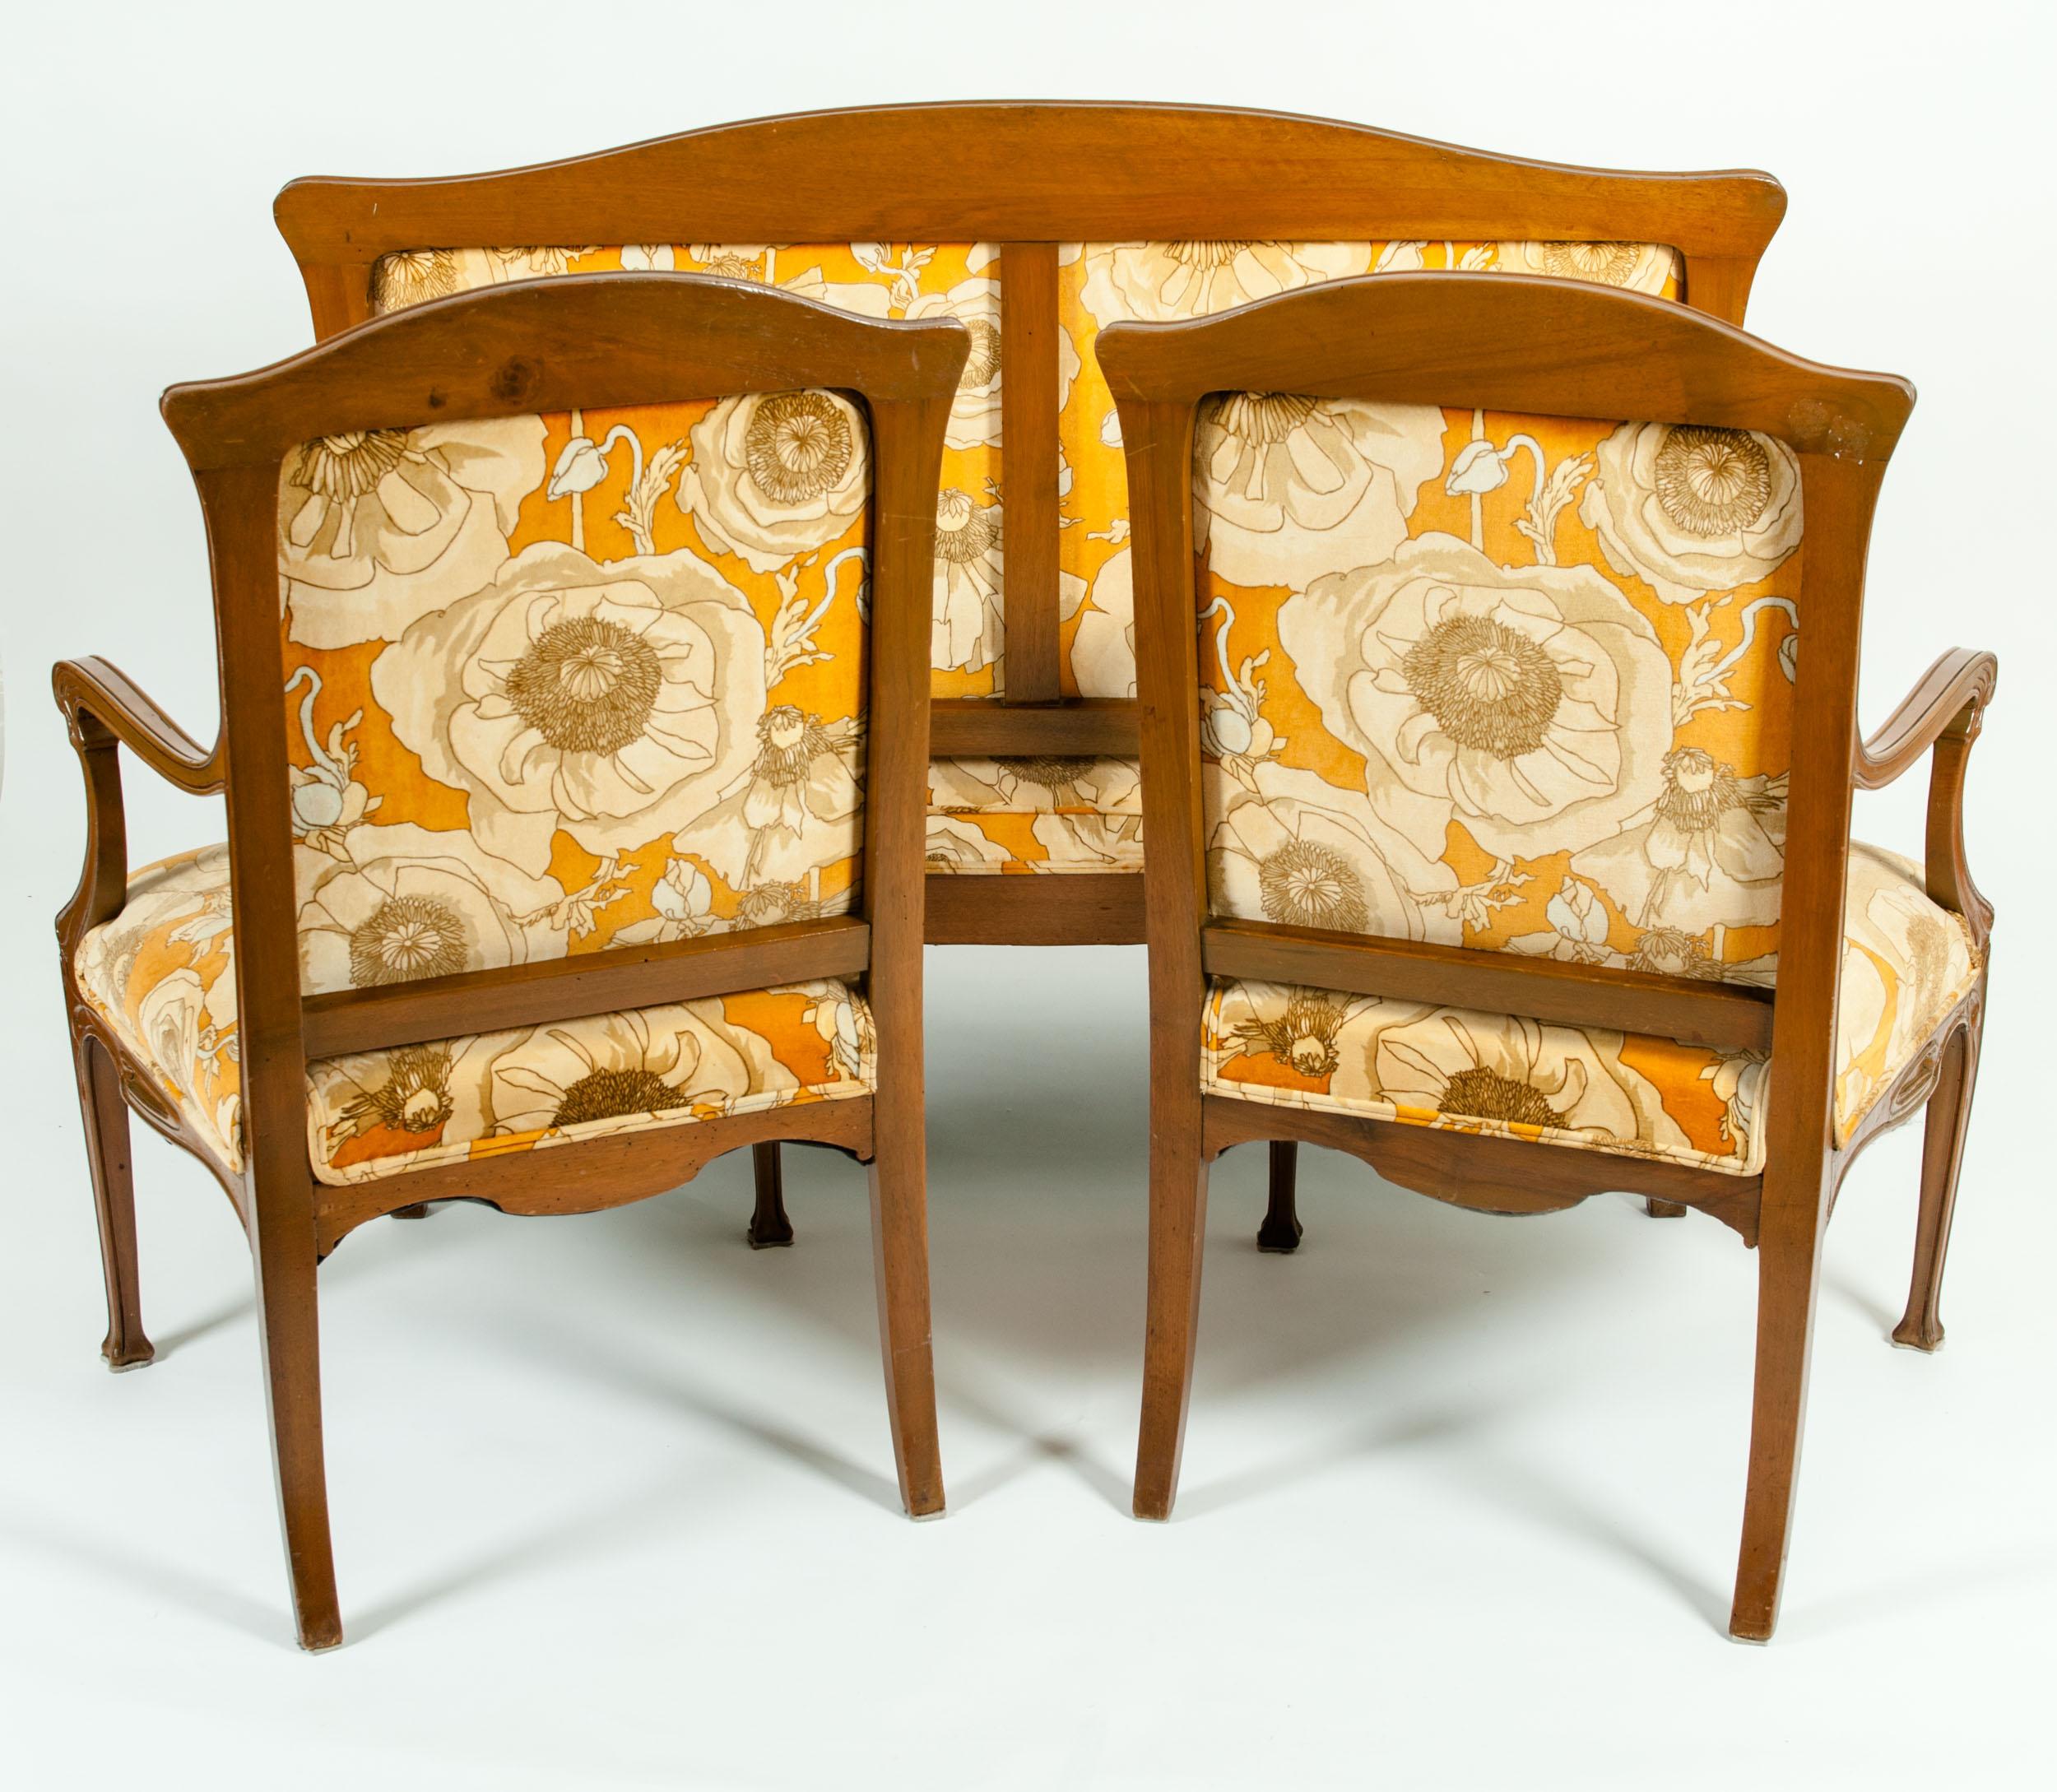 Early 20th Century Louis Majorelle Three-Piece Seating Set 4